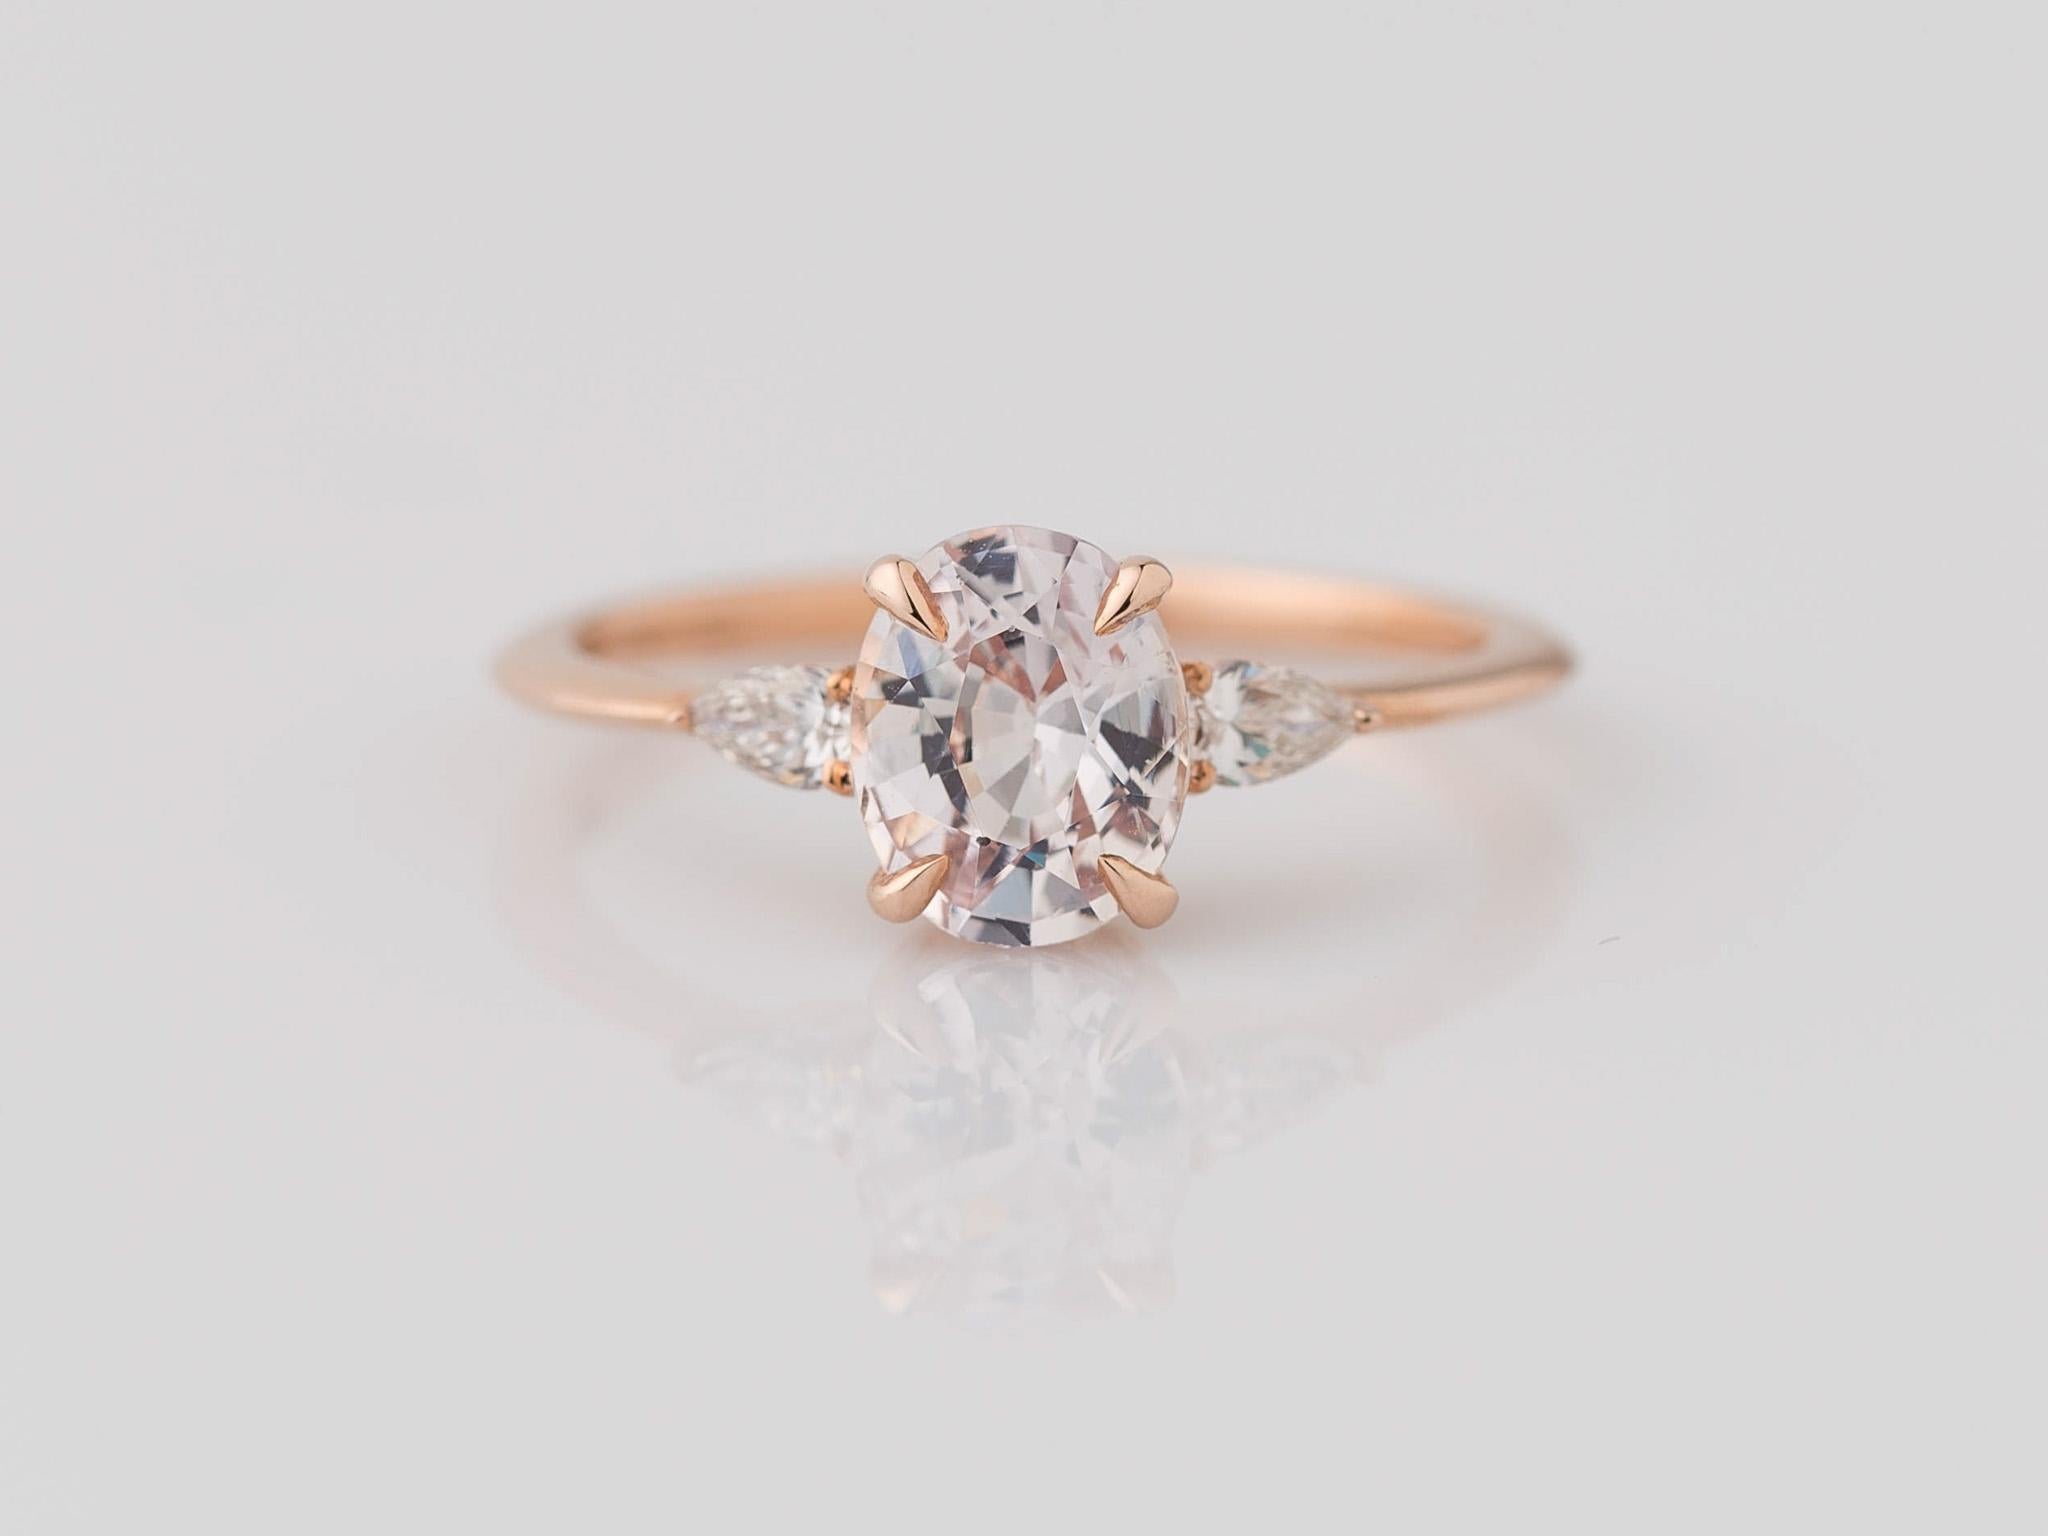 Indulge in the enchanting beauty of our GIA-certified 14K Rose Gold 3-Stone Oval Pink Sapphire Diamond Ring. At its heart lies a captivating oval-cut light pink sapphire, weighing 1.39 carats and measuring 7.45x5.95x4.12mm. Flanking this center